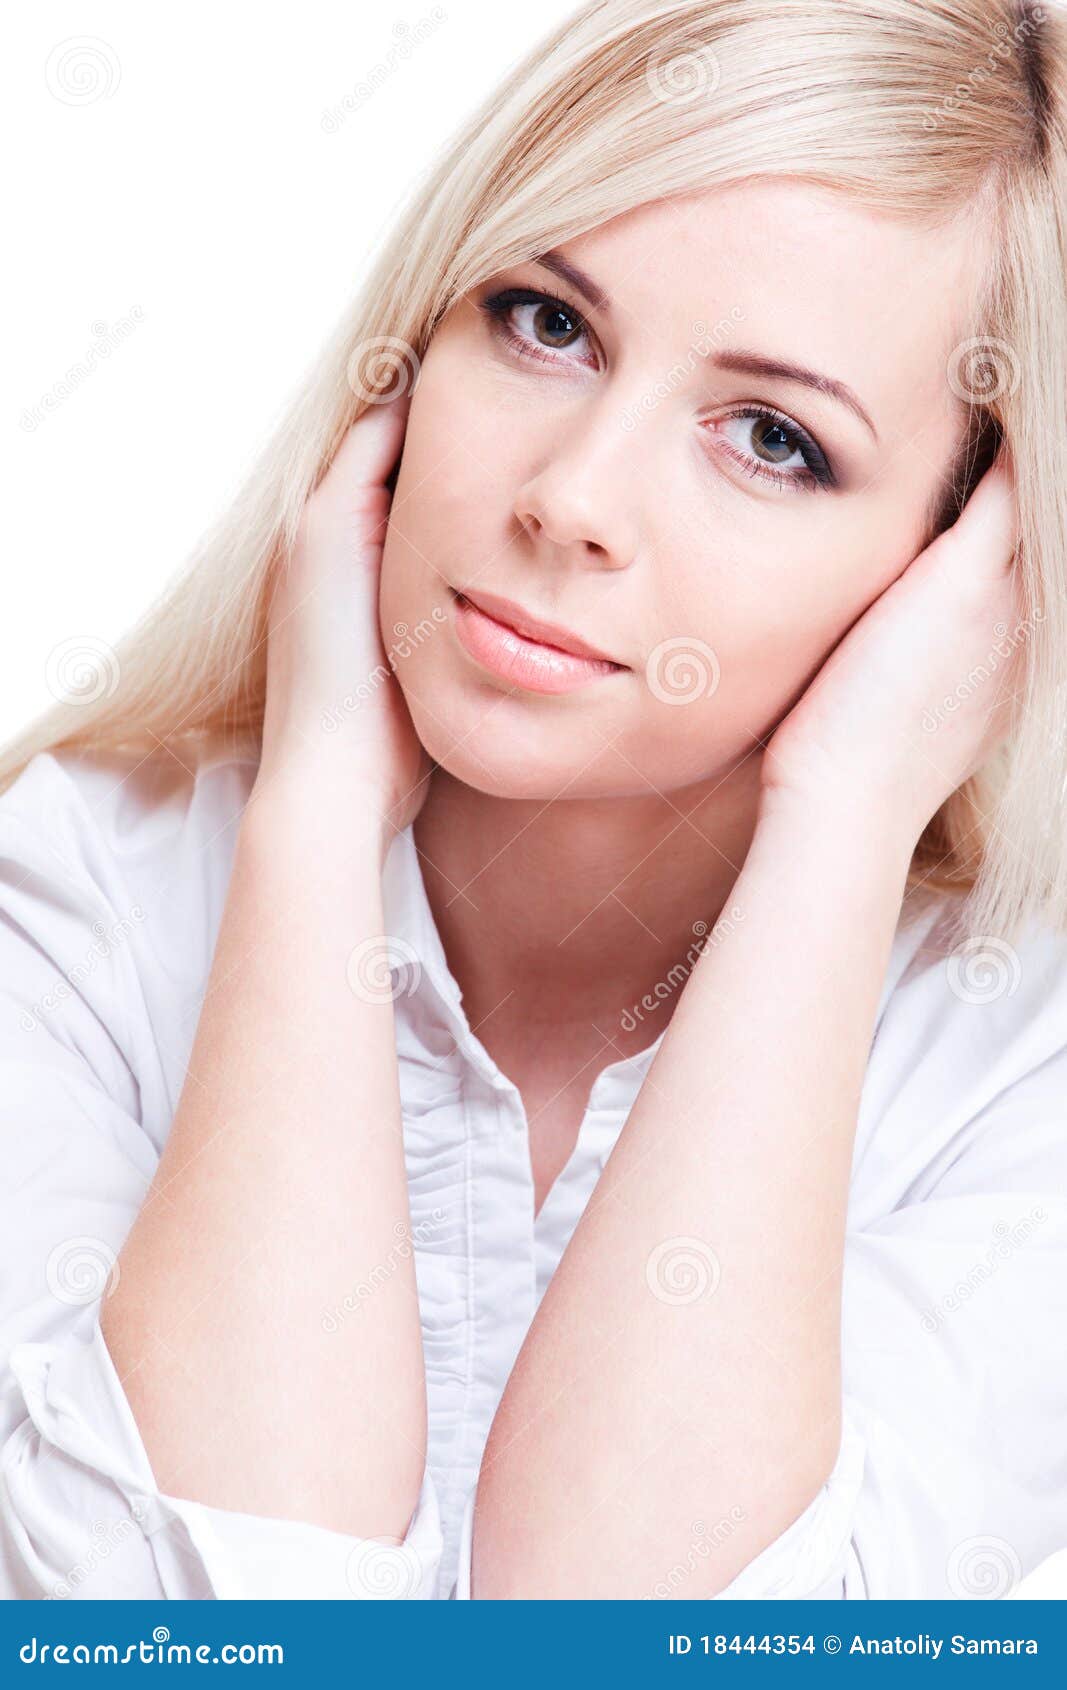 Charming woman stock photo. Image of model, attractive - 18444354